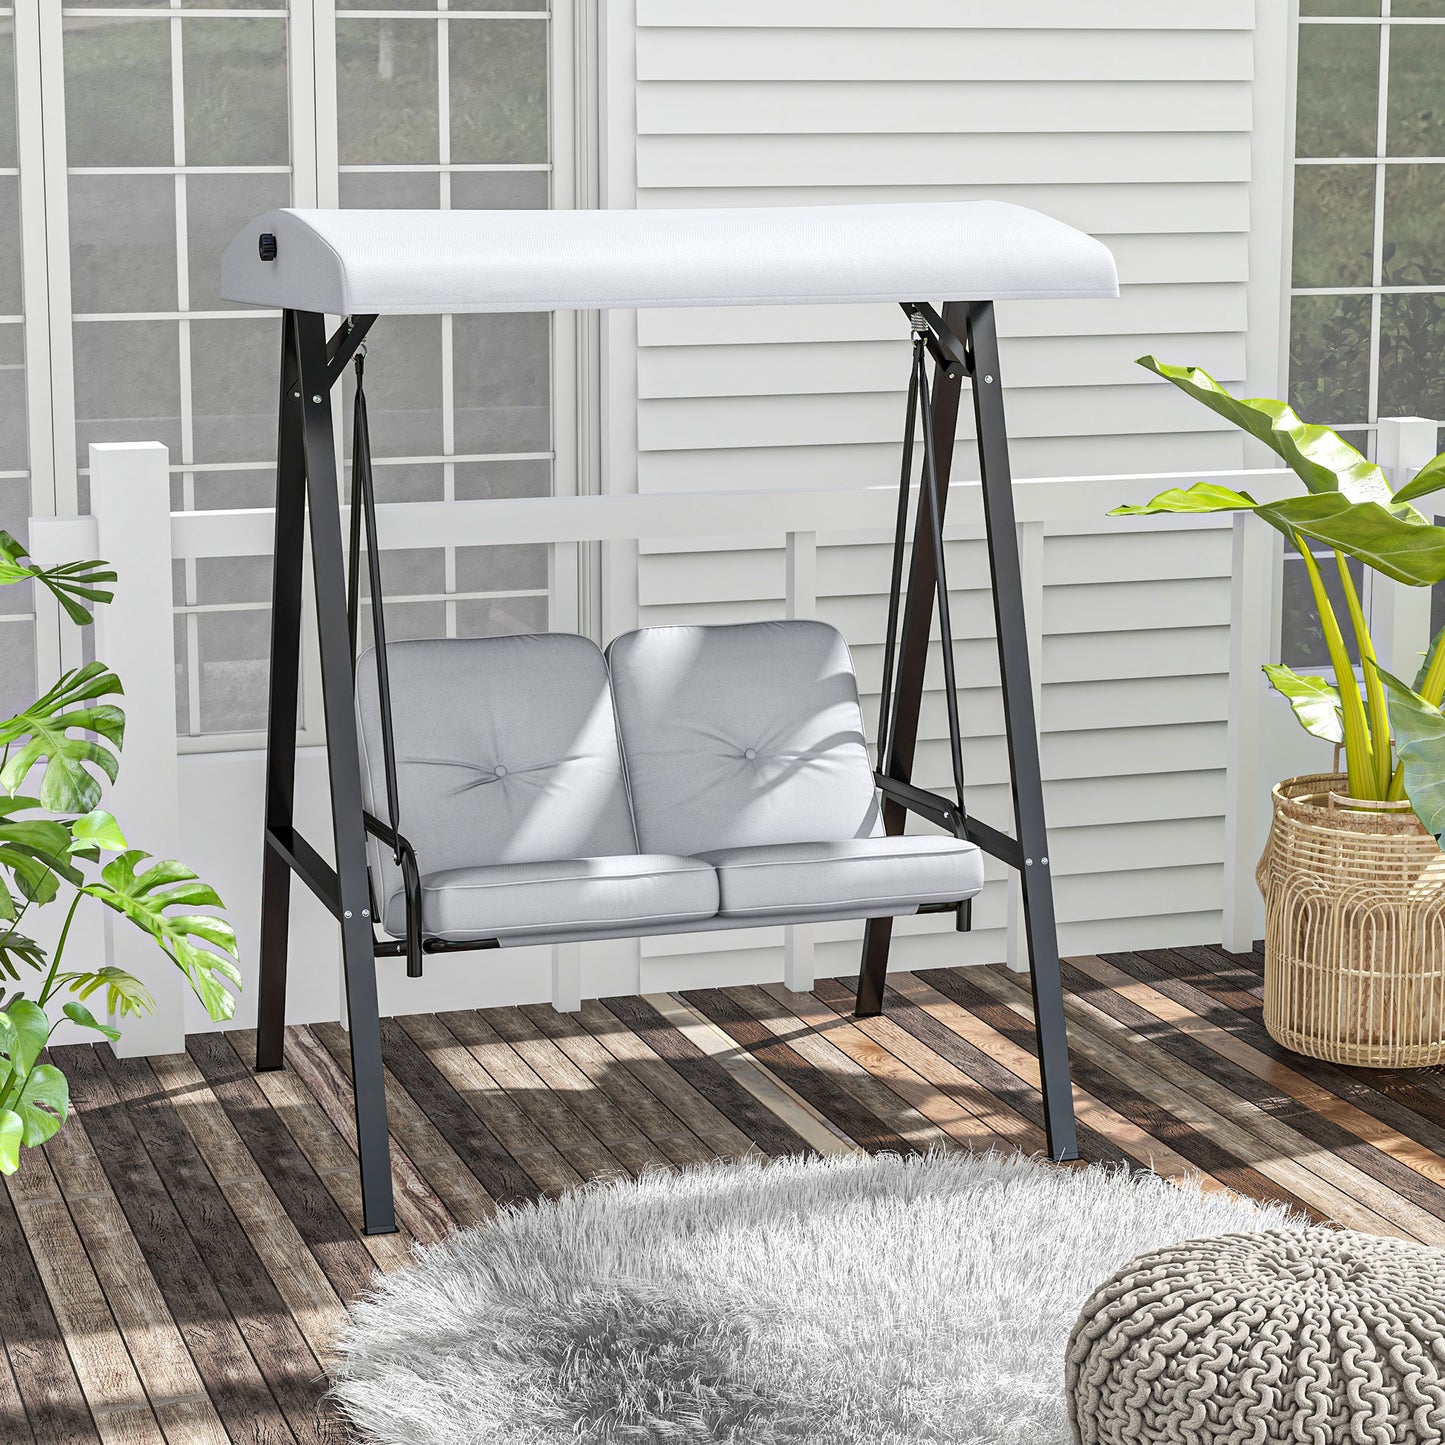 Outsunny Two-Seater Garden Swing Bench, with Adjustable Canopy - Light Grey